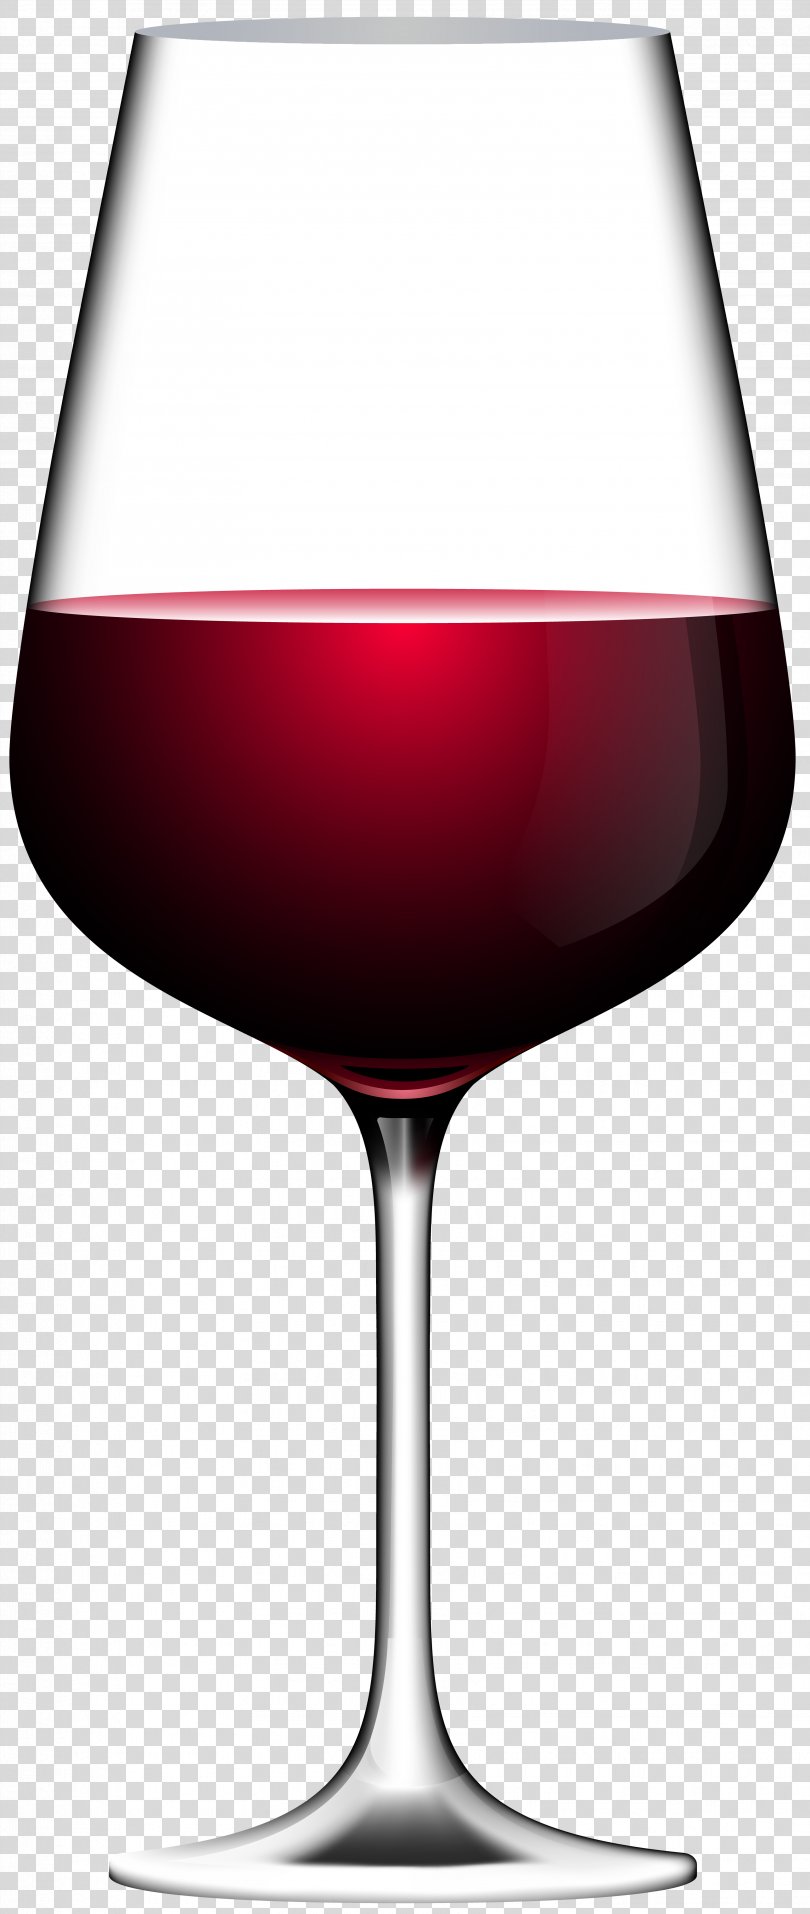 Red Wine Champagne Wine Glass Clip Art, Red Wine Glass Transparent Clip Art Image PNG